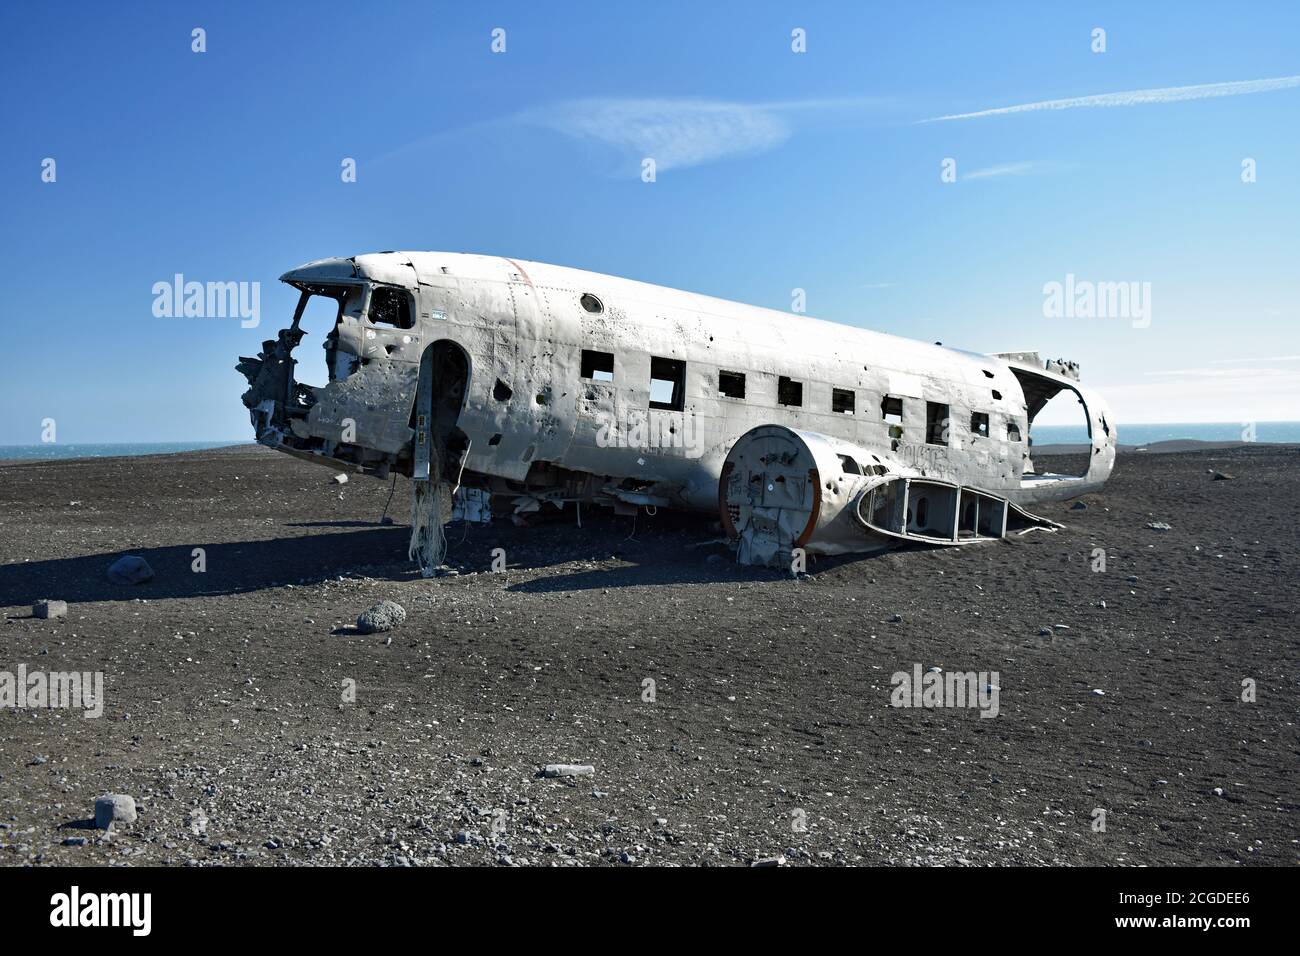 The fuselage of the Solheimasandur Plane Wreck sits on the black sand glacial outwash plains of Myrdalsjokull on a clear sunny day with blue sky. Stock Photo